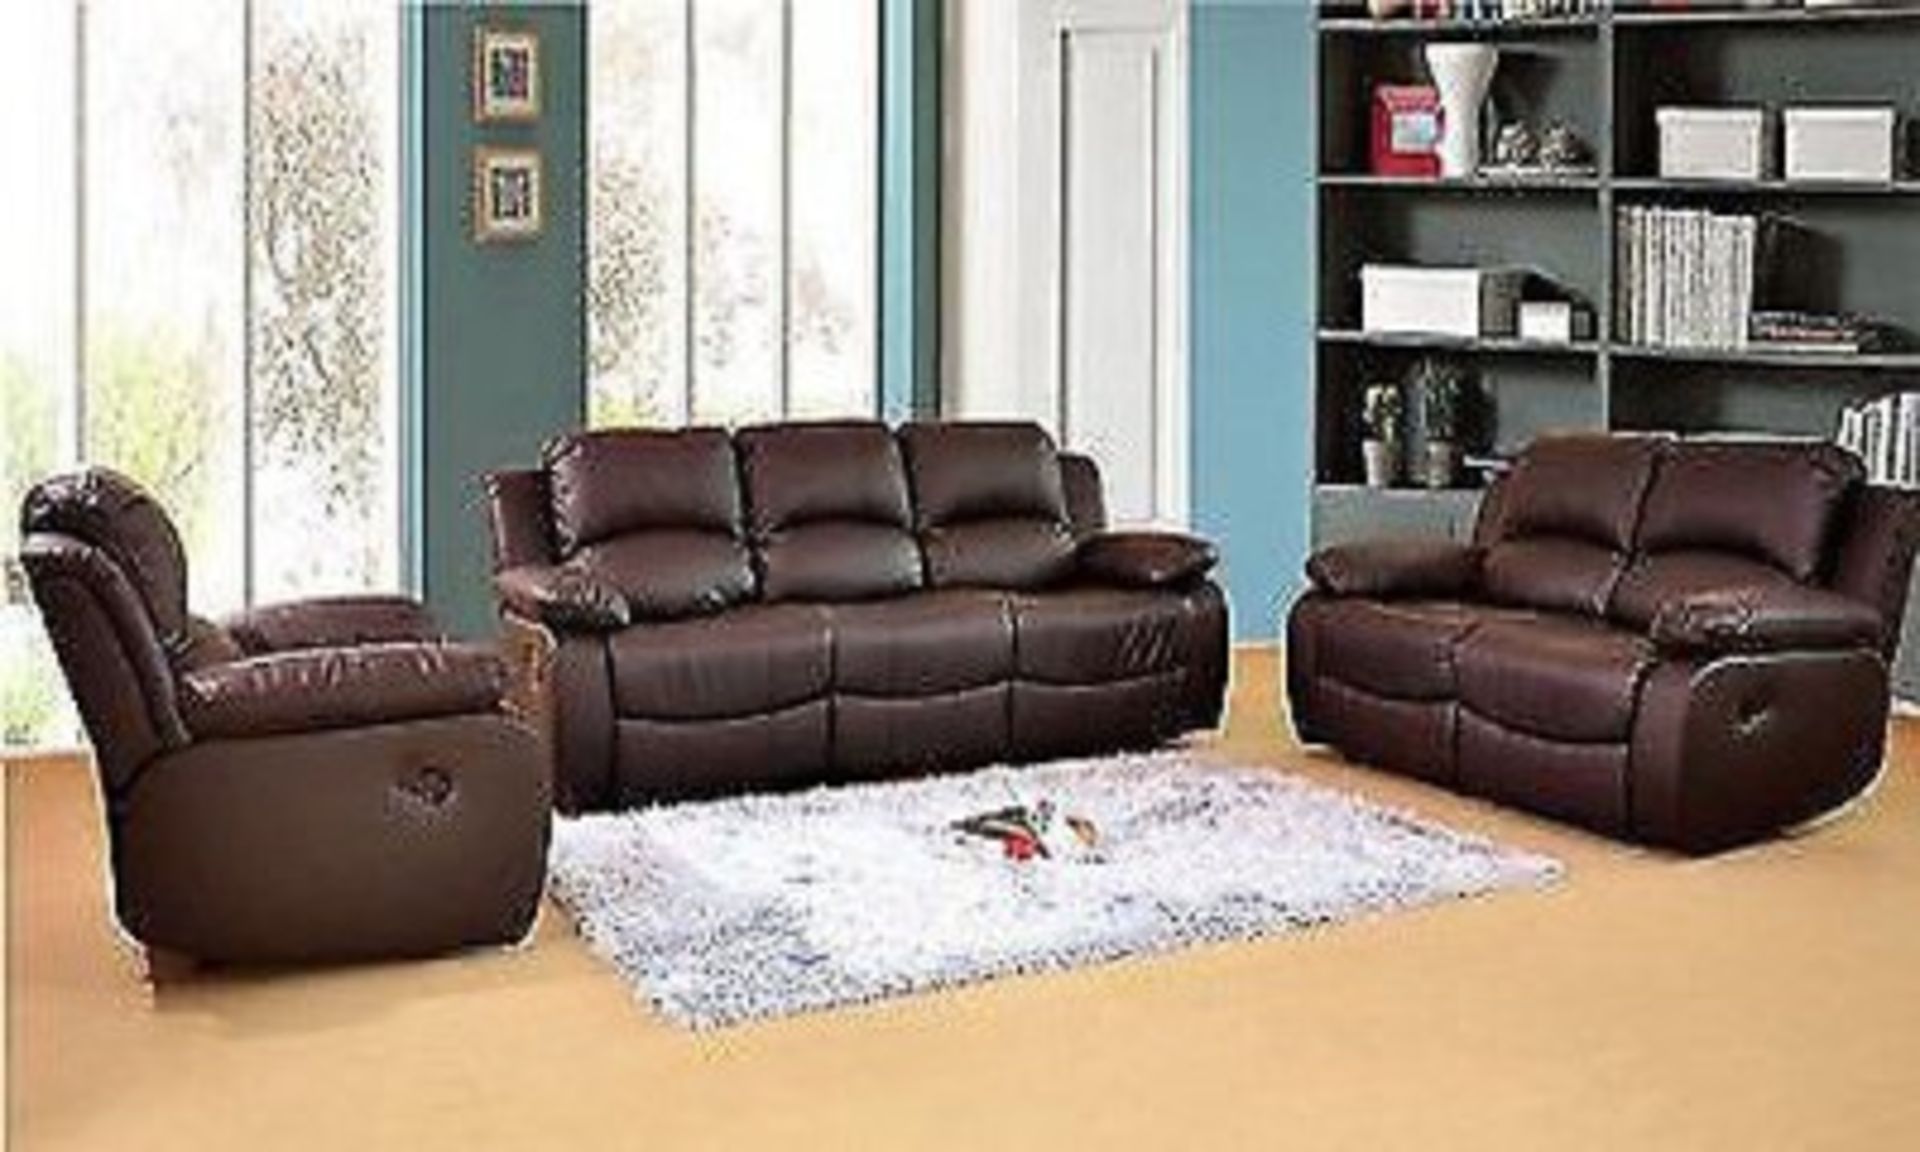 Brand new direct from the manufacturers 3 seater and 2 seater supreme valance leather reclining sofa